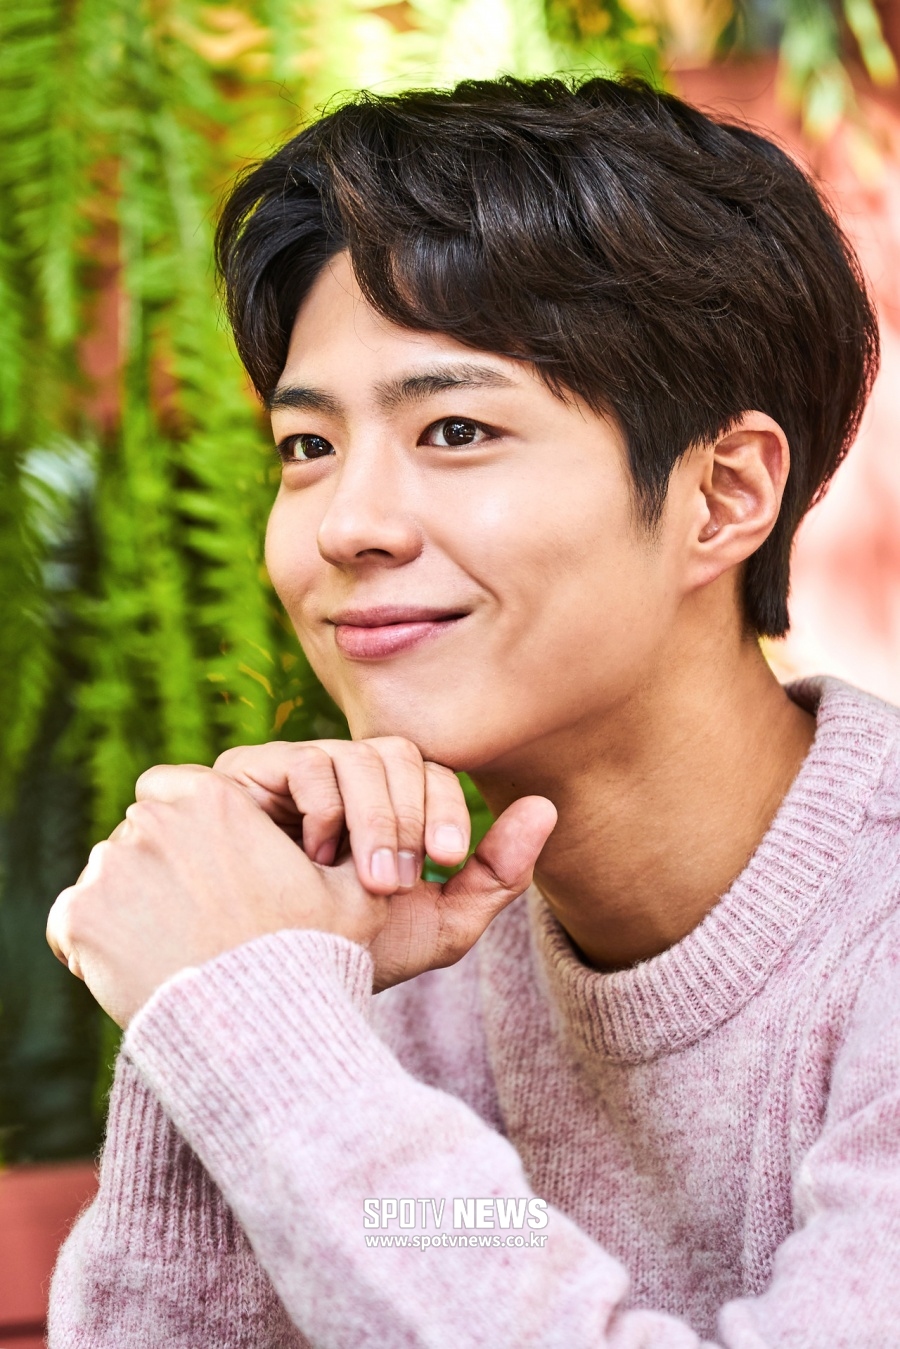 Actor Park Bo-gum Enlisted is spreading to false rumors that fans will be attracted to the company, and the unit is preparing to join Car Parking and prepare for the Drive Thru.Park Bo-gum, who passed the Navy Cultural Promotional Corps, will be Enlisted through the Basic Military Education Team of Haekyun Education Command in Jinhae-gu, Changwon, Gyeongsangnam-do on the afternoon of the 31st.He will receive six weeks of basic military training at the basic military training center and will serve as a cultural public relations officer.As the COVID-19 spread was not so bad, the second stage of social distance was held in the metropolitan area following the metropolitan area, and the rumor that fans would be driven to the Jinhae was made uneasy by Park Bo-gums Enlisted.In Jinhae, where there was no COVID-19 confirmation, the first confirmation was recently released.The Great Outdoors were revealed, but it was not true, as Park Bo-gum fans in Seoul and each province came down to Jinhae and stayed in hotels and motels.The apartment said, The previous announcement was wrong and I got off.The Great Outdoors have been up, with fans of Park Bo-gum also revealing their position that it is not true.The agency has already asked fans to refuse to visit the fans field, saying, It is time for the social distance caused by Corona and consideration for the health of everyone.I will quietly enter the prison without any special procedures, he told the media.I am sorry to have Enlisted without giving a brief greeting, but I decided that it was a time to consider everyones health because of COVID-19, he said. I made this decision because I was sorry to have Enlisted without giving a brief greeting.Even if it is not because of Park Bo-gum, the unit is paying attention to prevention and spread of COVID-19 as the participants and families gathered from all states gather.It was reported that some of the soldiers were blocked from parking in front of the training camp, and that they were able to get out of the car and enter the unit.The Naval Training Command Basic Military Education Team 1st recruit training battalion said, As traffic congestion is expected near the main gate of the education company due to the family members and acquaintances visiting the entrance ceremony on the day of admission, family members and acquaintances should be able to greet in advance and cooperate with the Drive Sruhae zone in front of the main gate of the education company.They also said that on the same day, the subjects will be divided into about one hour each time, and all the subjects will write a questionnaire at the front gate and conduct a PCR test for all the people after the examination by the military doctor.=